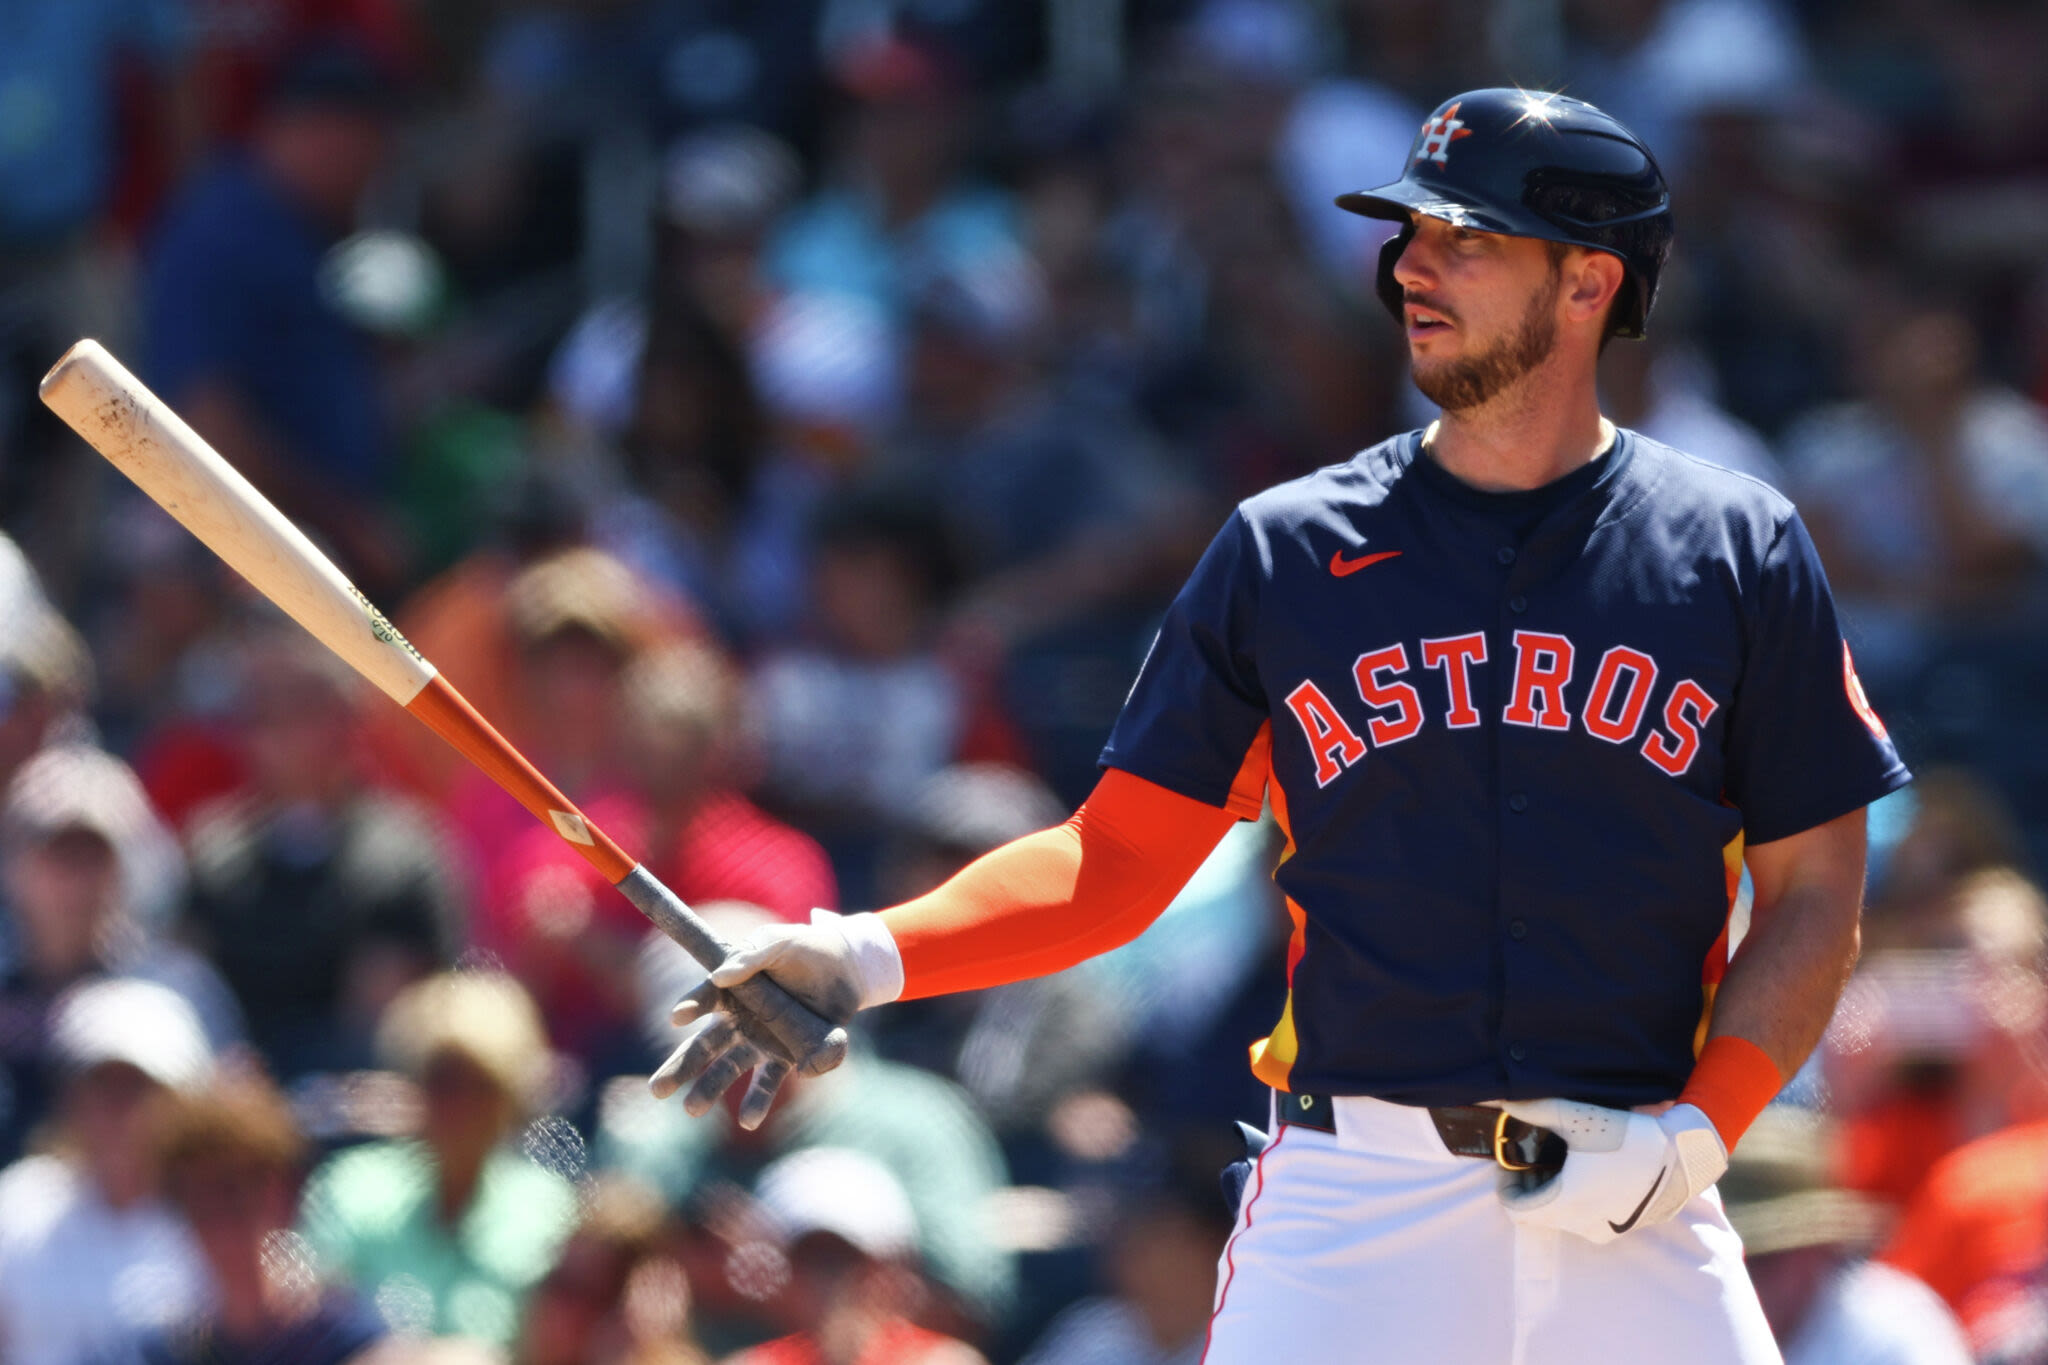 Astros' Kyle Tucker will skip All-Star game to focus on rehab